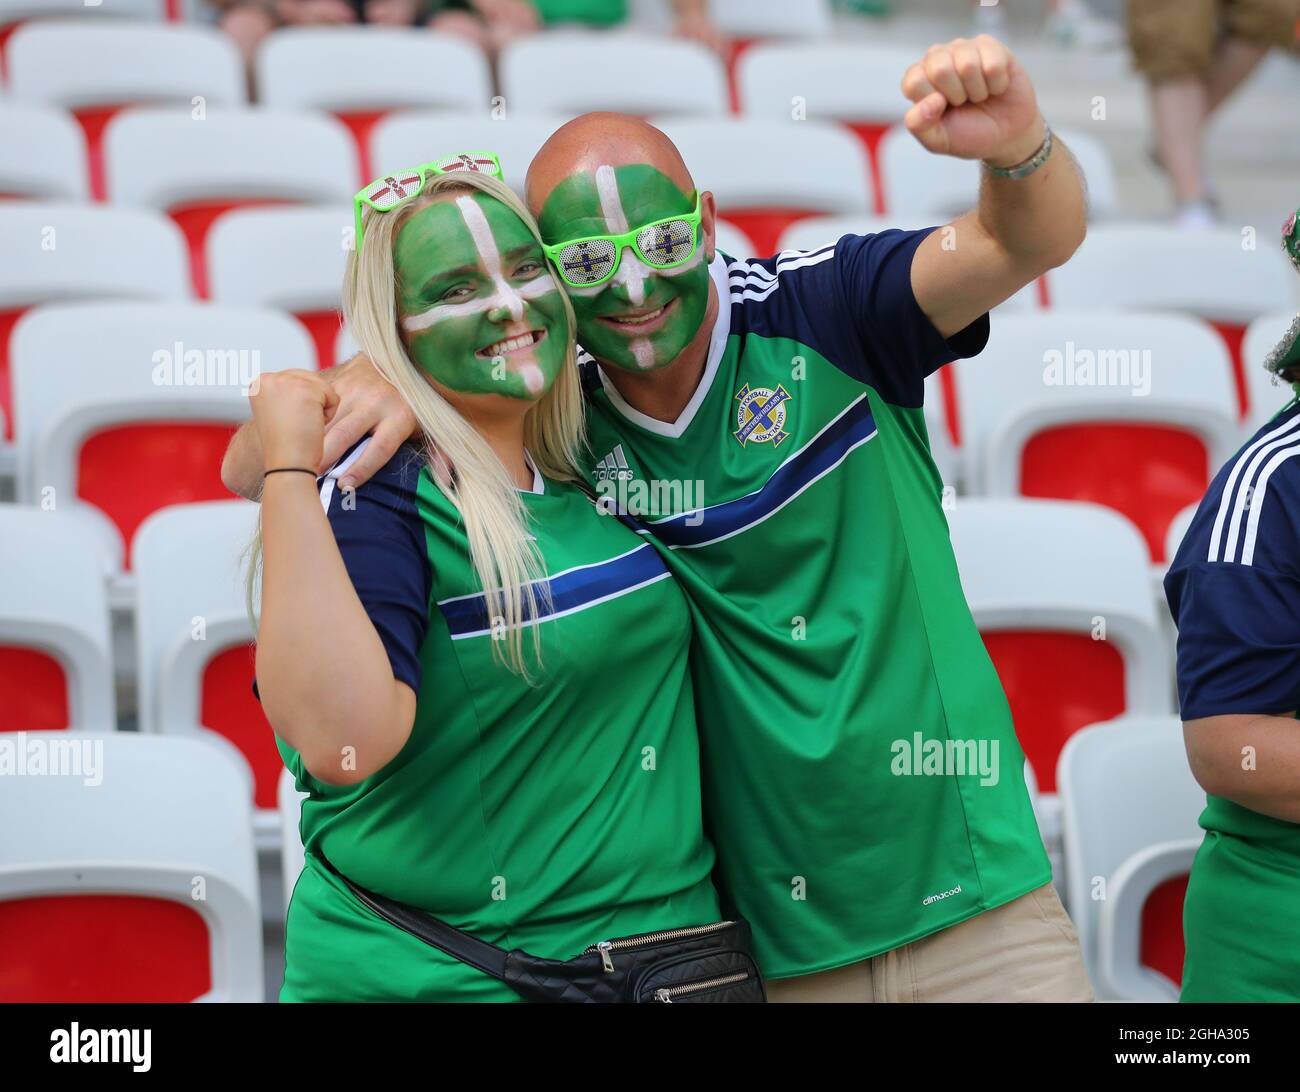 Northern Ireland's fans enjoy the atmosphere during the UEFA European Championship 2016 match at the Allianz Riviera, Nice. Picture date June 12th, 2016 Pic David Klein/Sportimage via PA Images Stock Photo